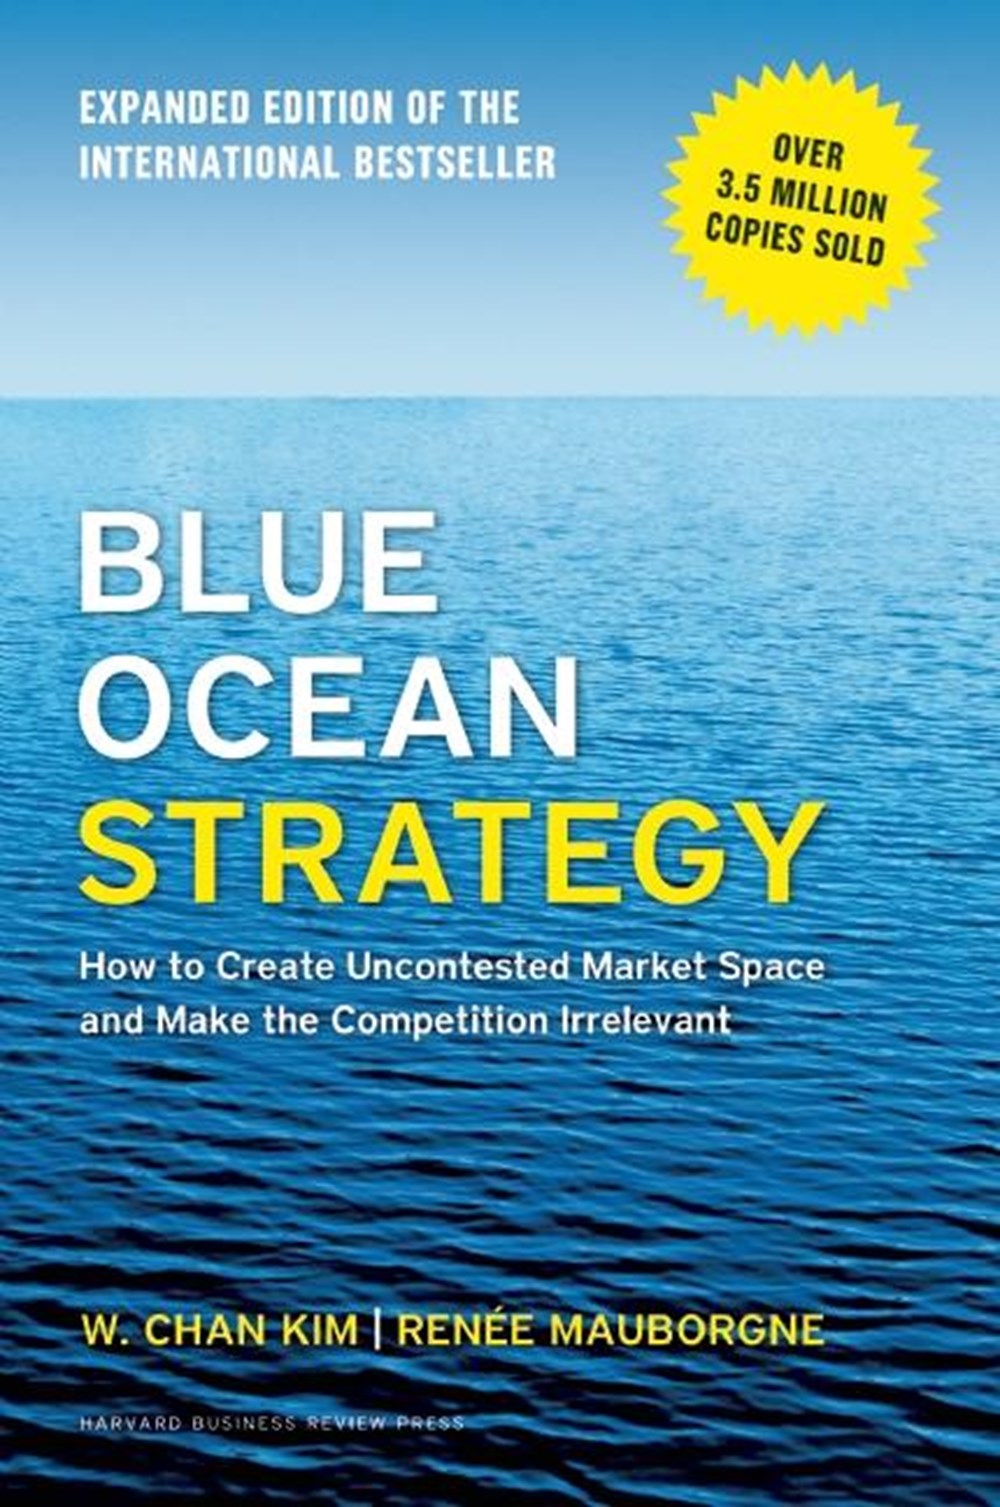 Blue Ocean Strategy, Expanded Edition How to Create Uncontested Market Space and Make the Competitio